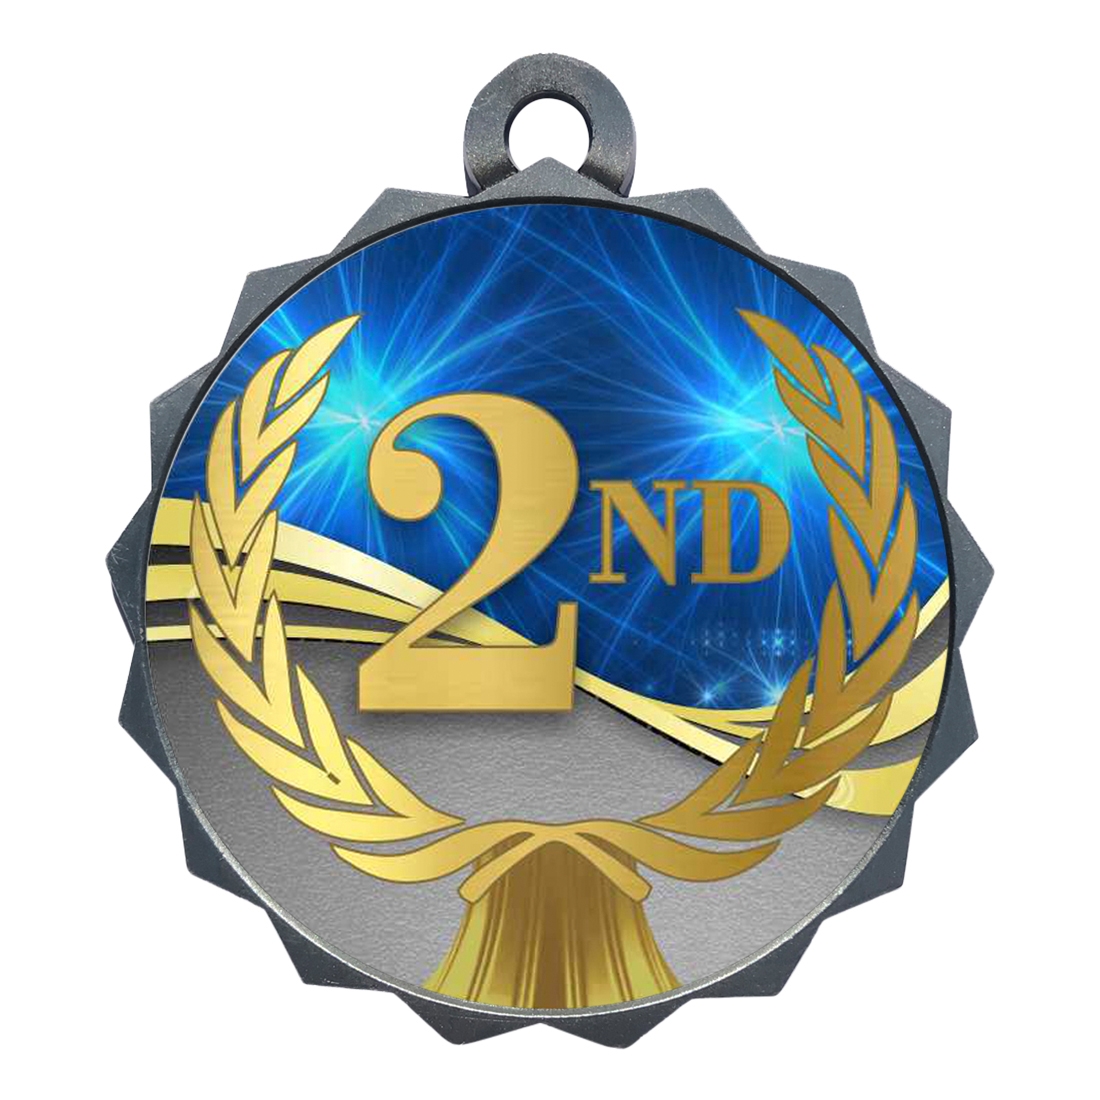 2-1/4" 2nd Place Medal